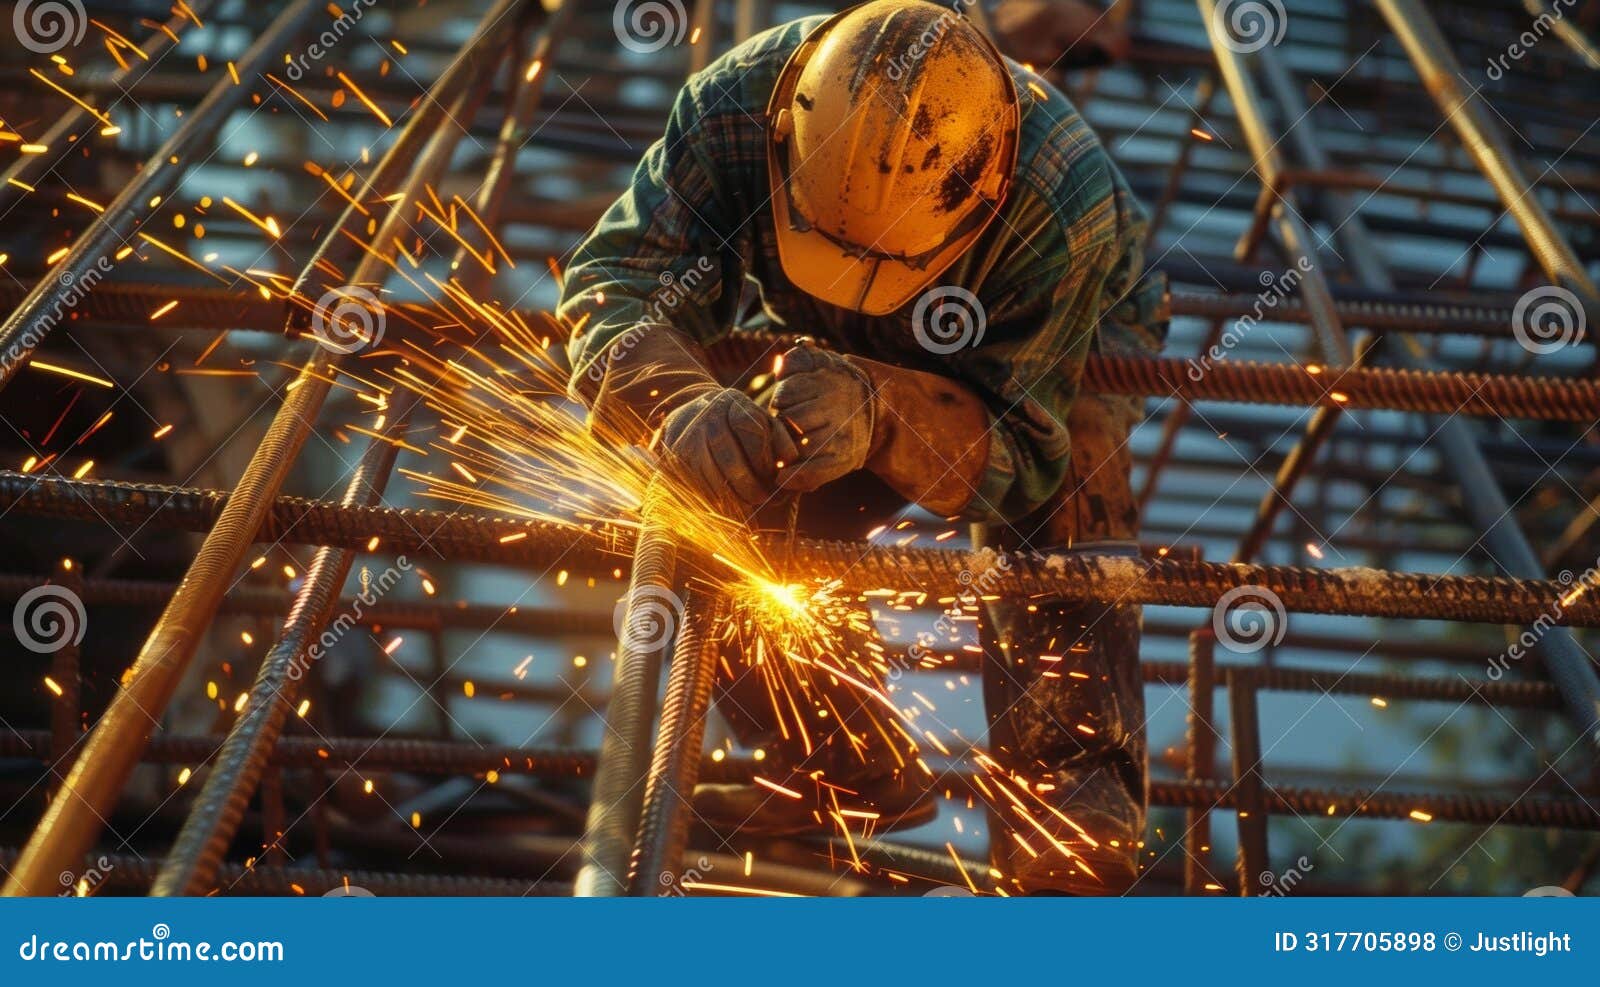 a construction worker welds metal pipes together creating the sy framework of a building